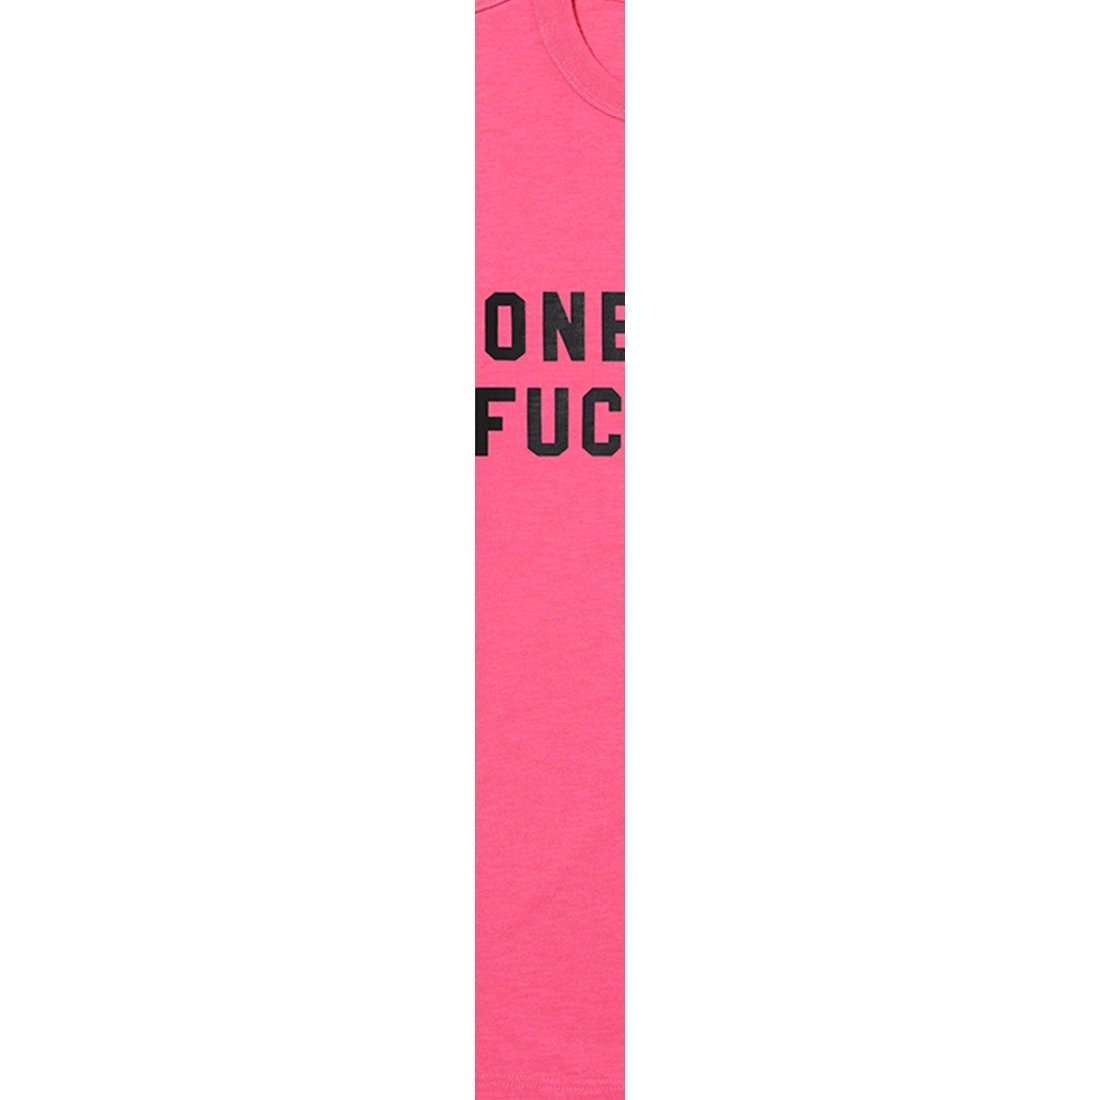 One Two Fuck You S S Top - spring summer 2023 - Supreme